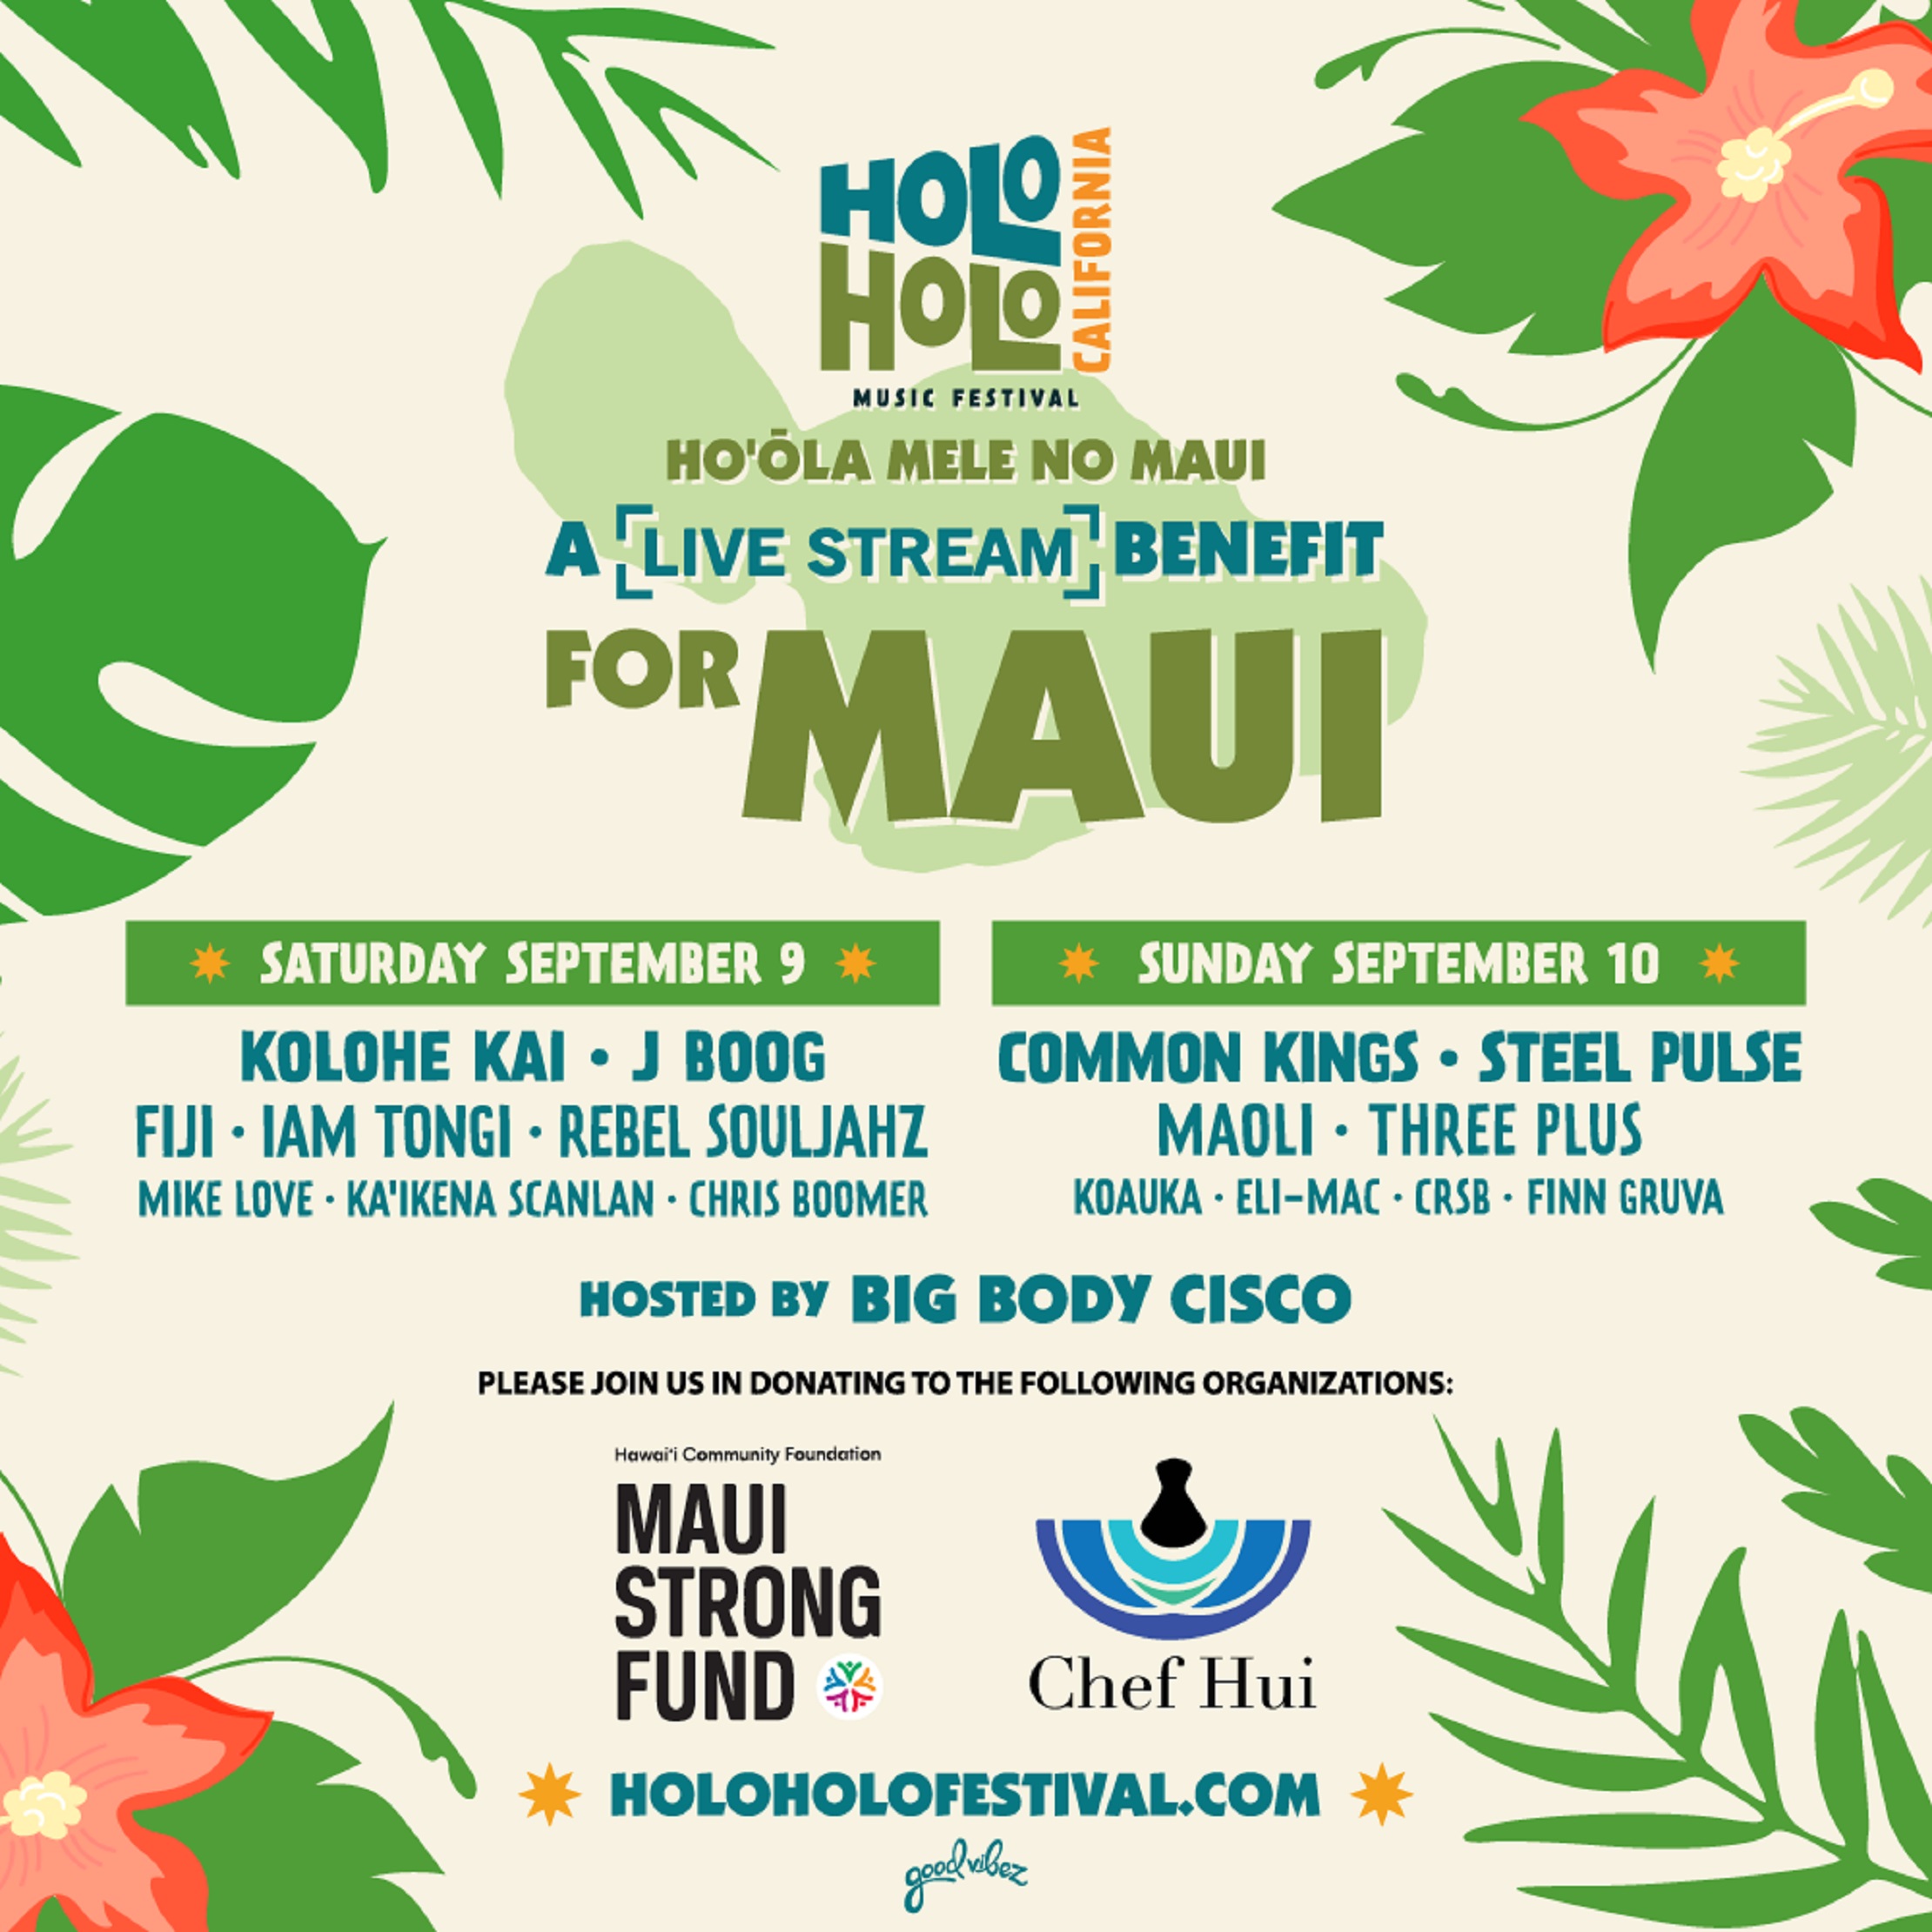 Holo Holo Music Festival To Raise Money For The Maui Strong Fund and Chef Hui Through Livestream